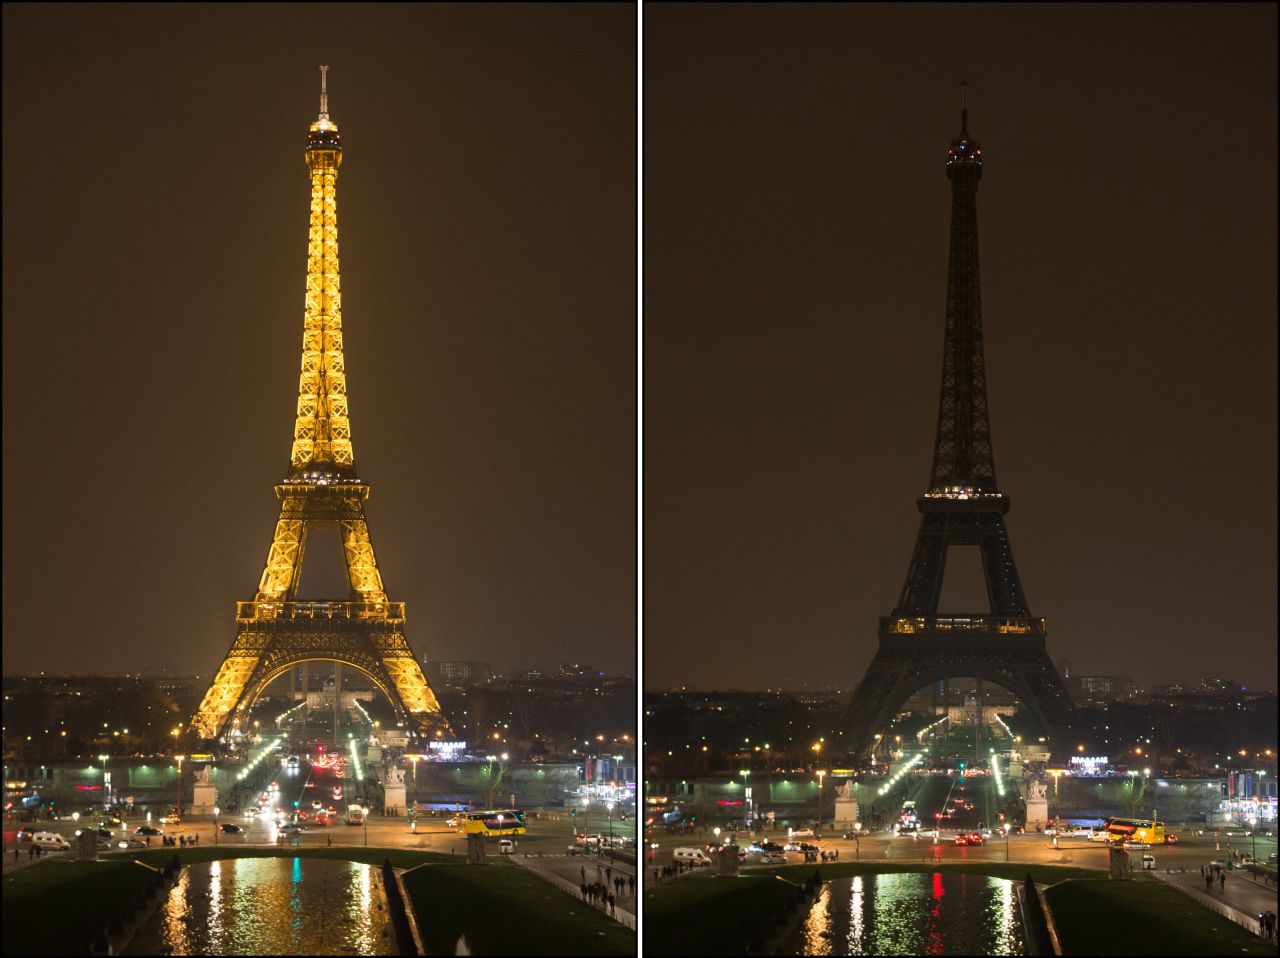 Photosshows The Eiffel Tower submerging into darkness at 8:30 pm local time as part of the Earth Hour switch-off.